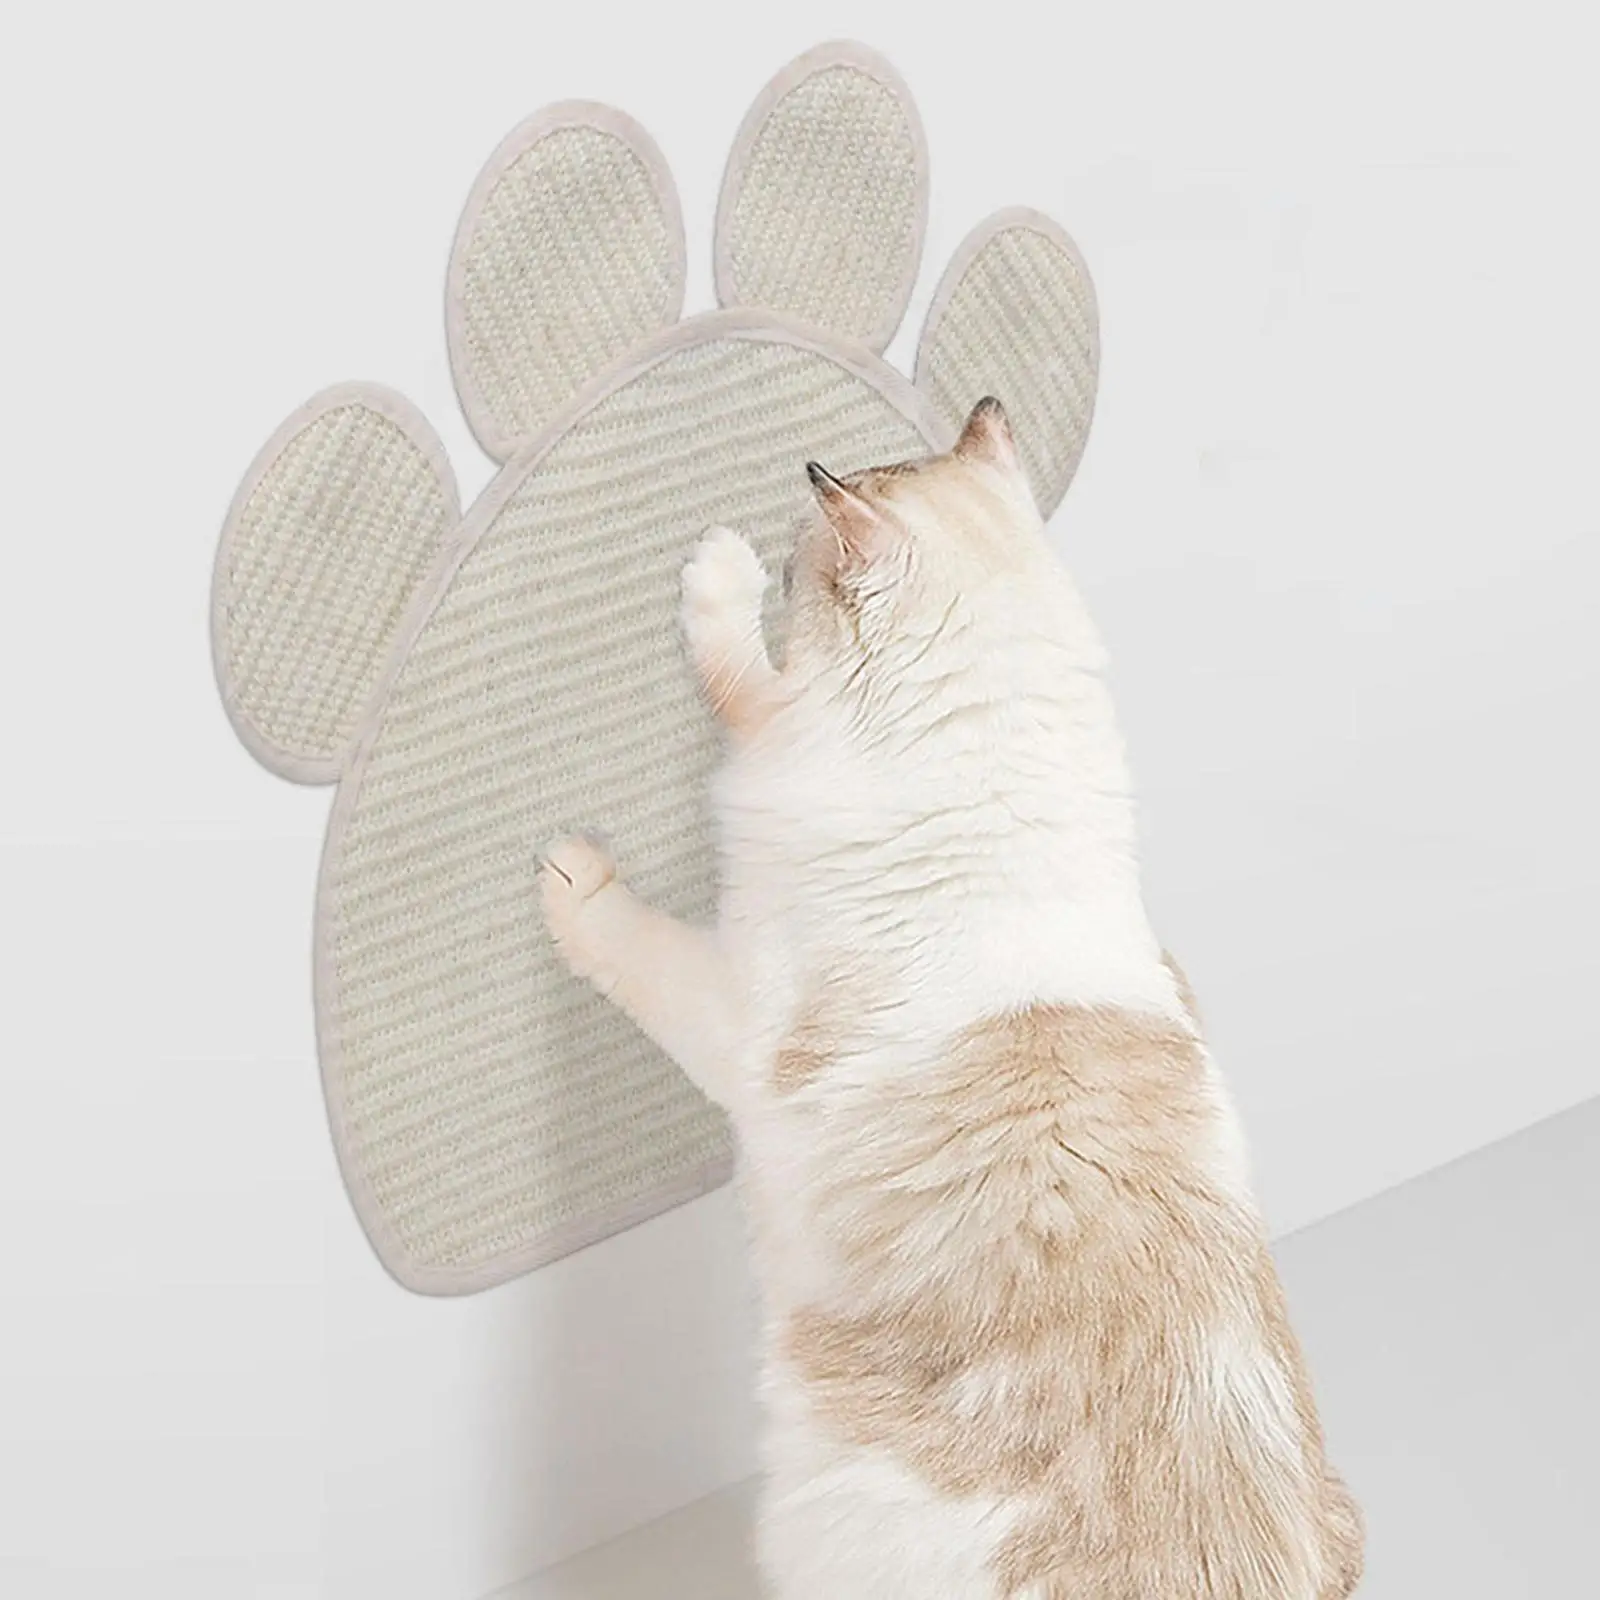 Cat Scratcher Mat Grinding Claws Sisal Fabric Protecting Kitty Scratching Pad Furniture Protector Carpet for Floor Couch